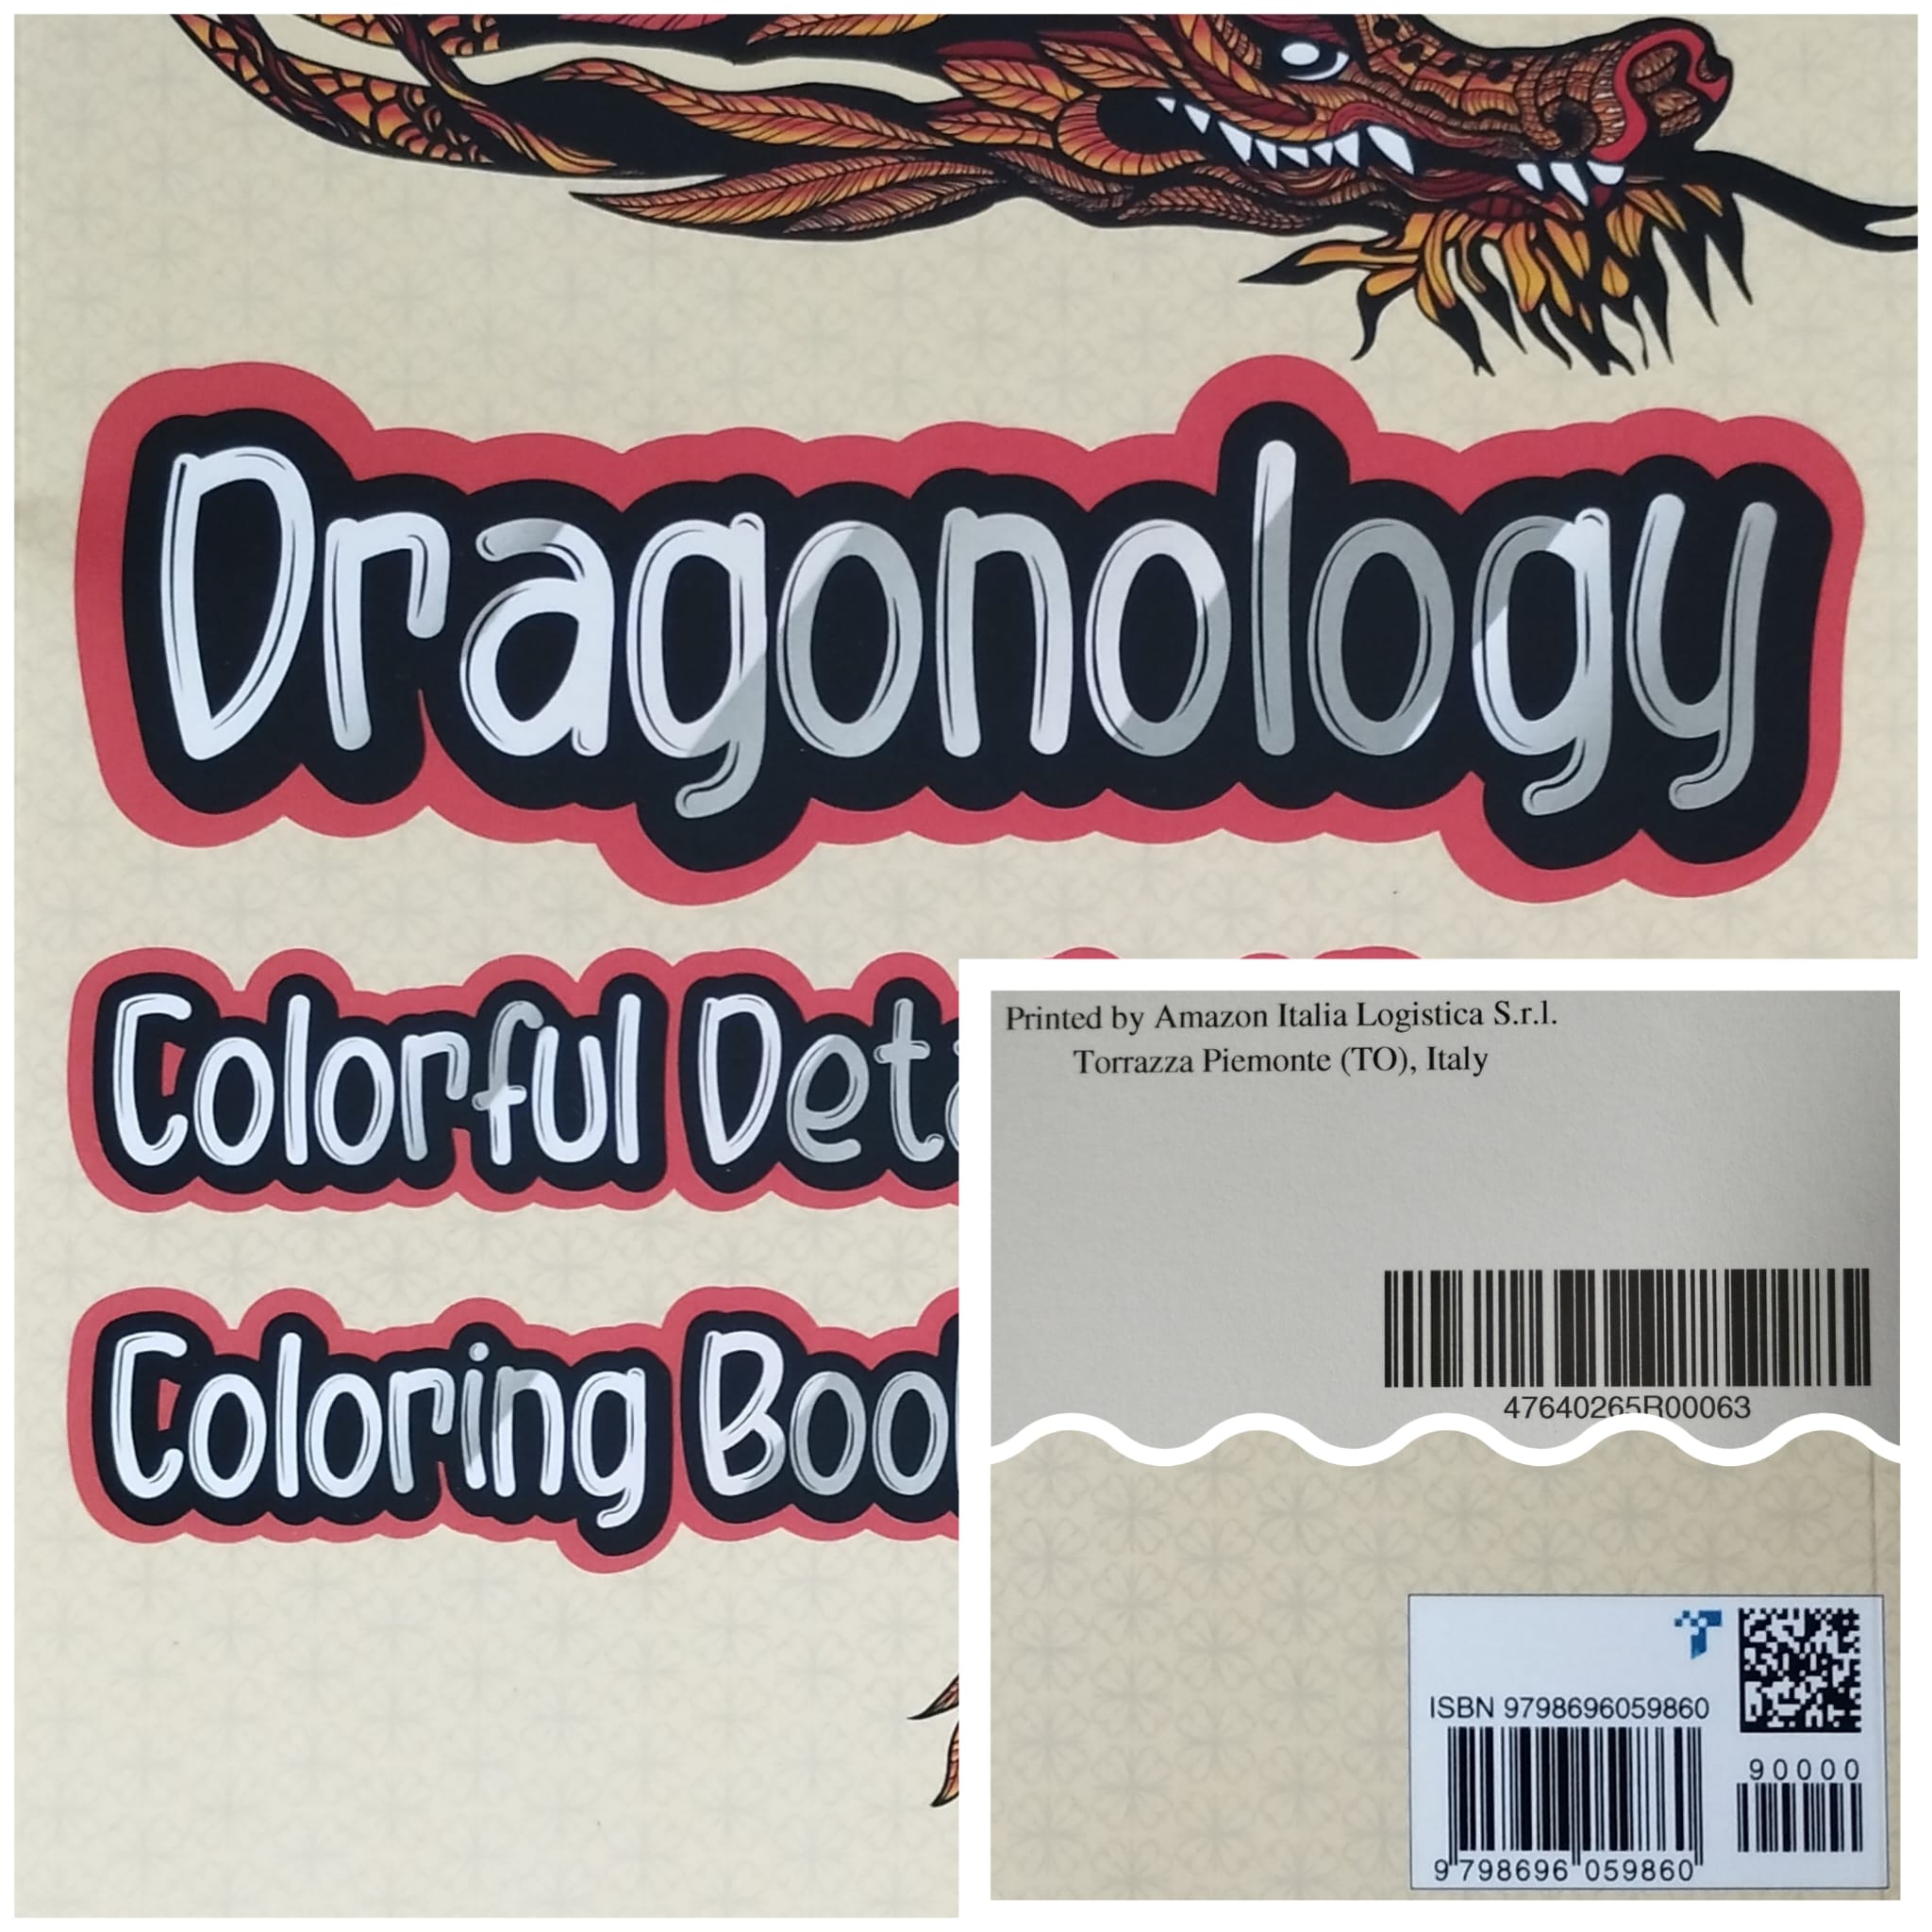 Dragonology Colorful Detailed Dragon Coloring Book For Adults Amazon.it